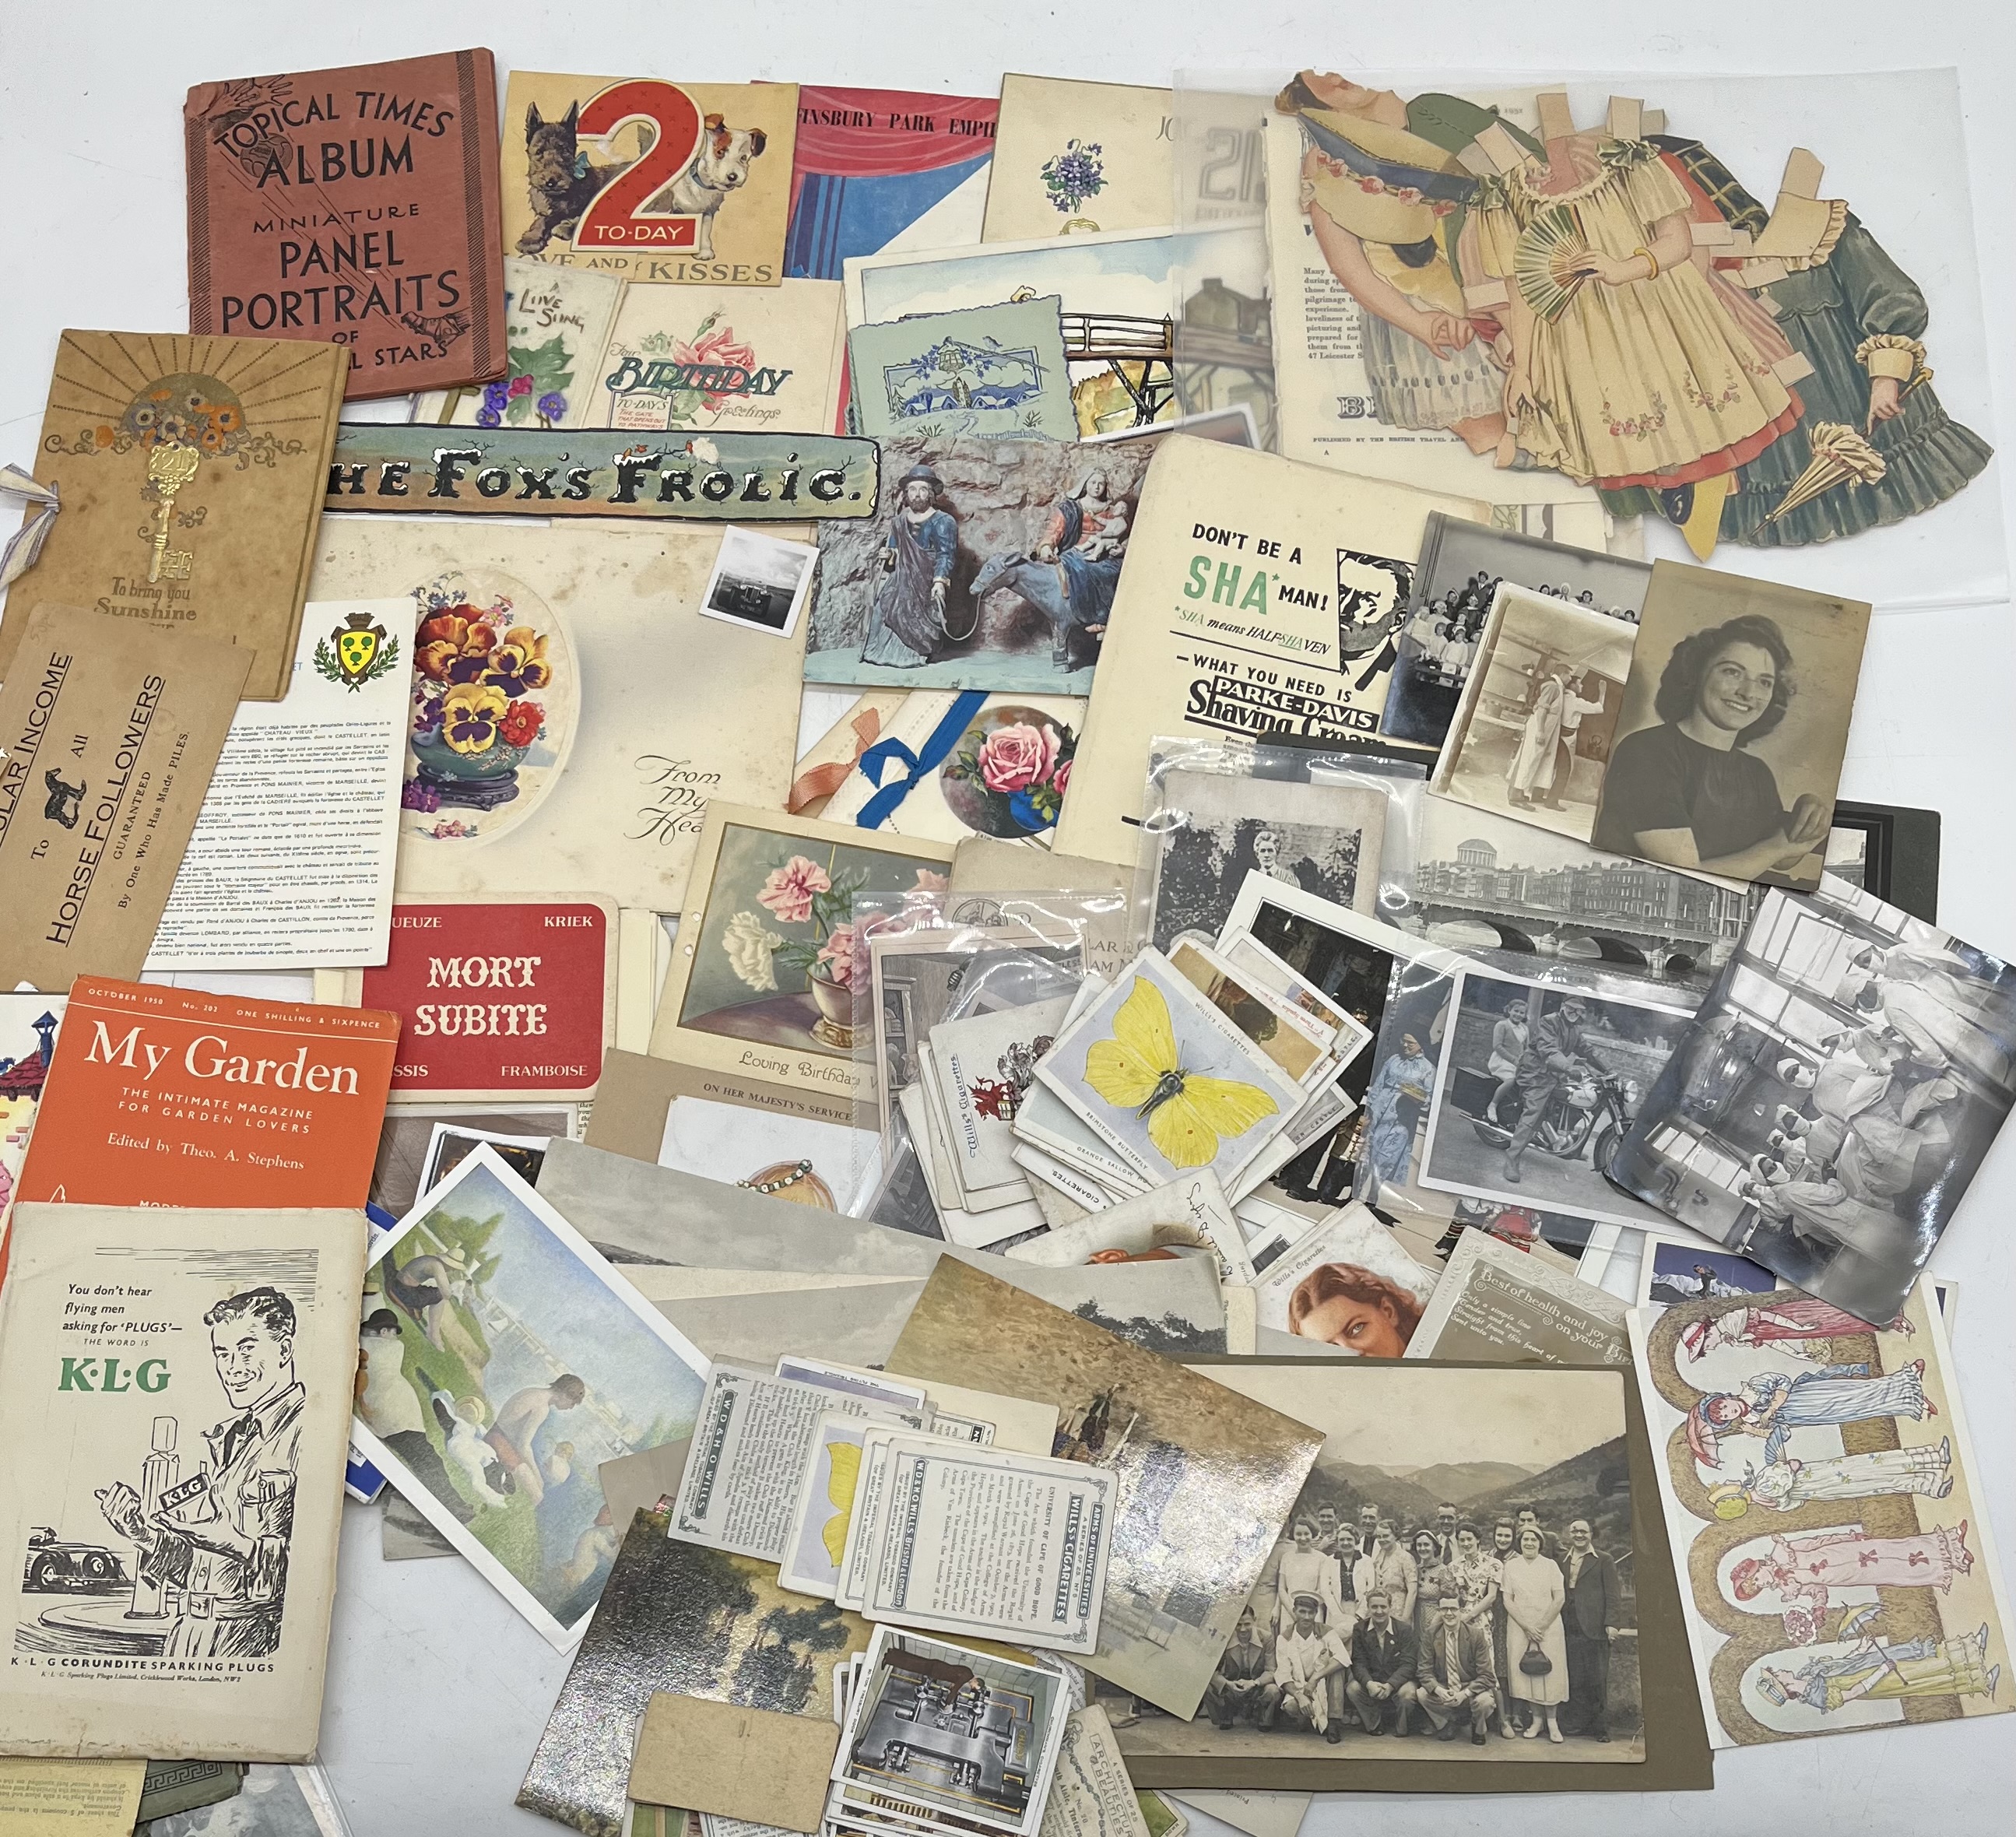 A large collection of vintage ephemera including photos, a Daily Express War Map, cards, - Image 2 of 3